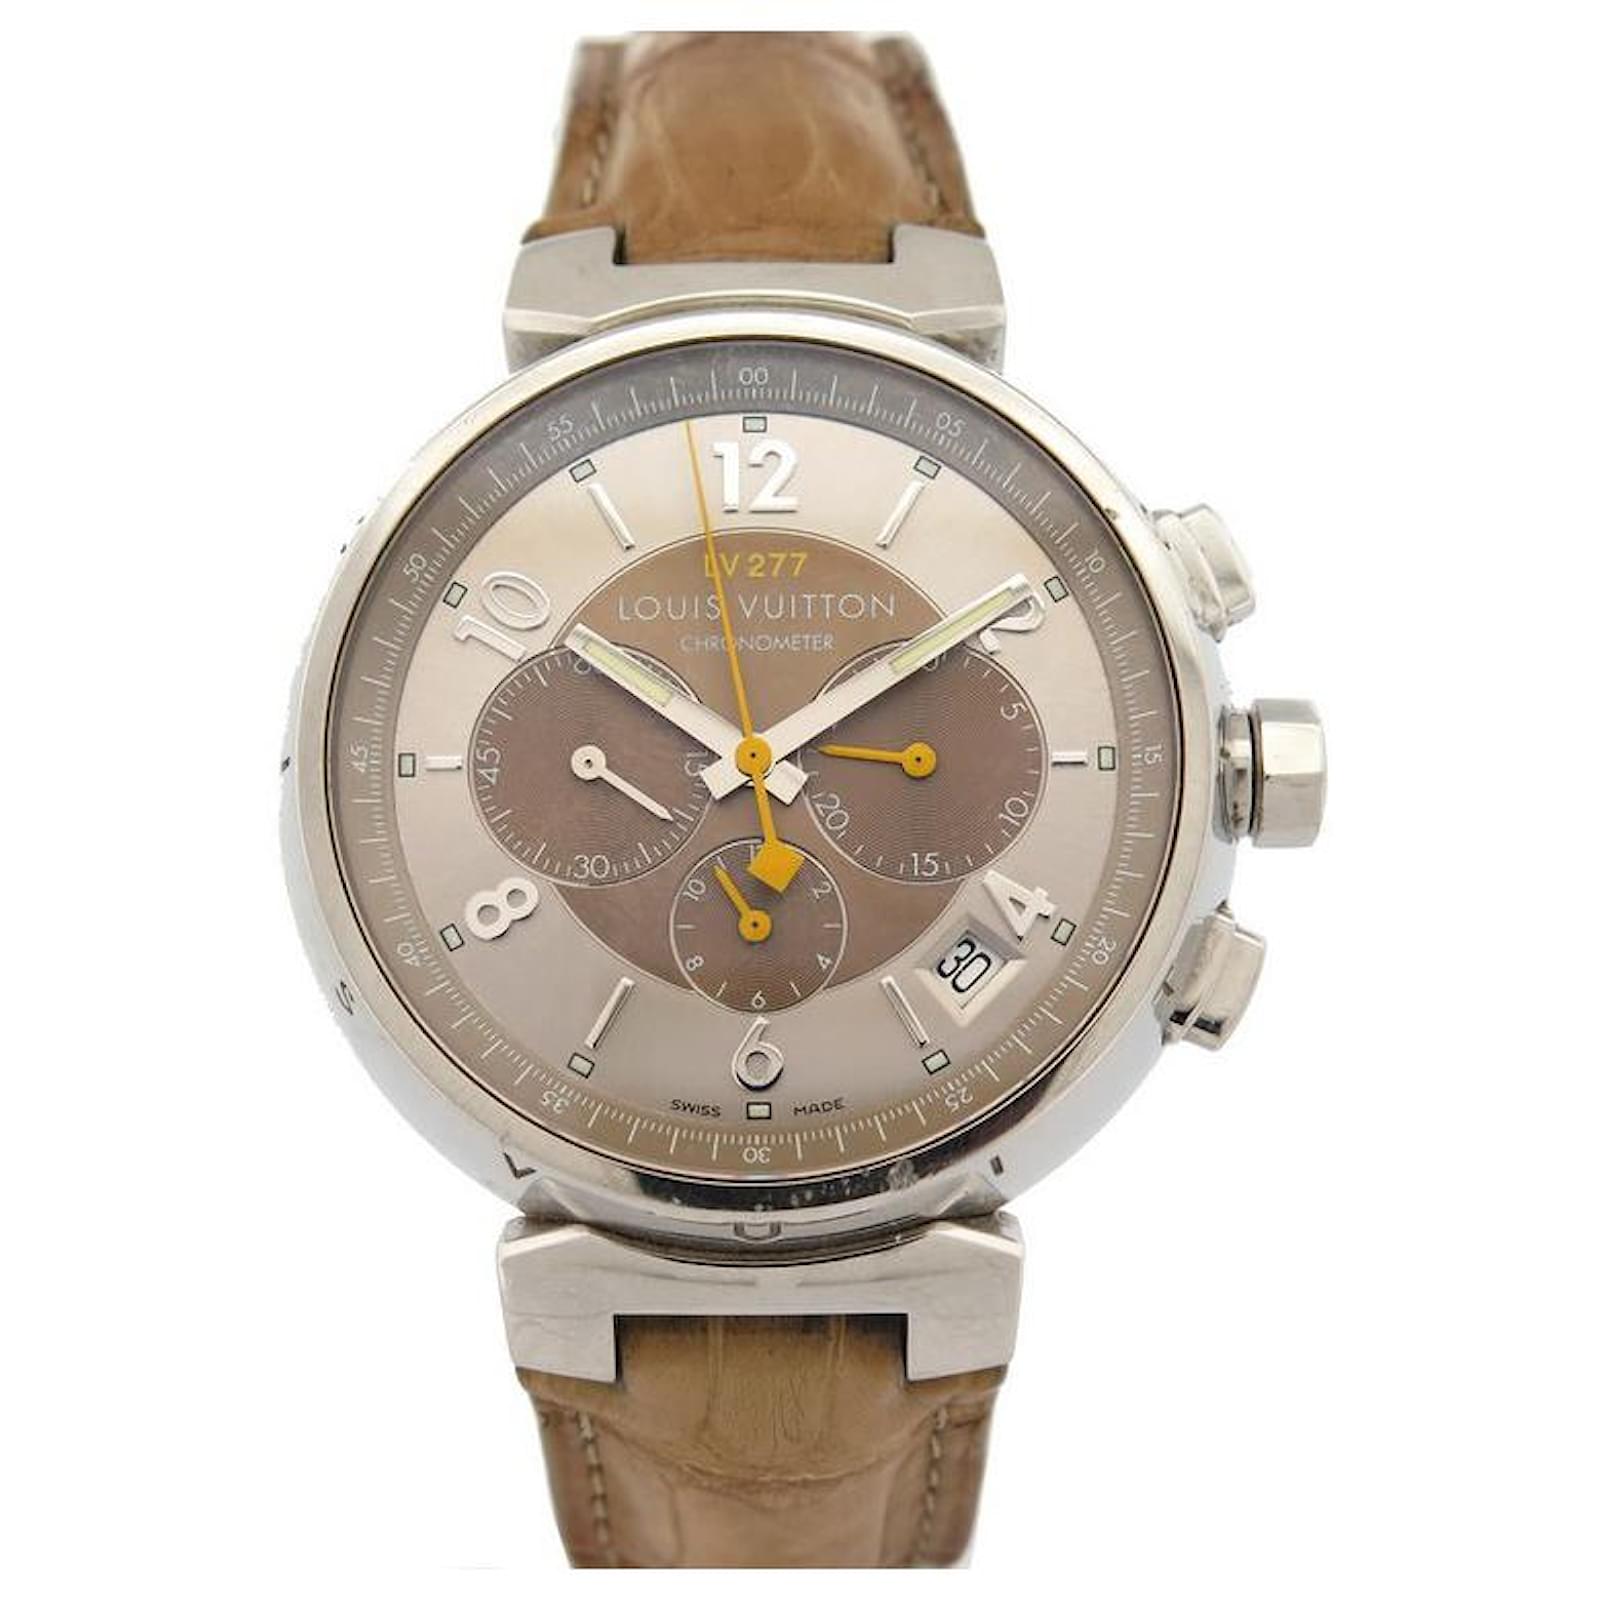 LOUIS VUITTON TAMBOUR LV WATCH277 43MM AUTOMATIC STEEL WATCH